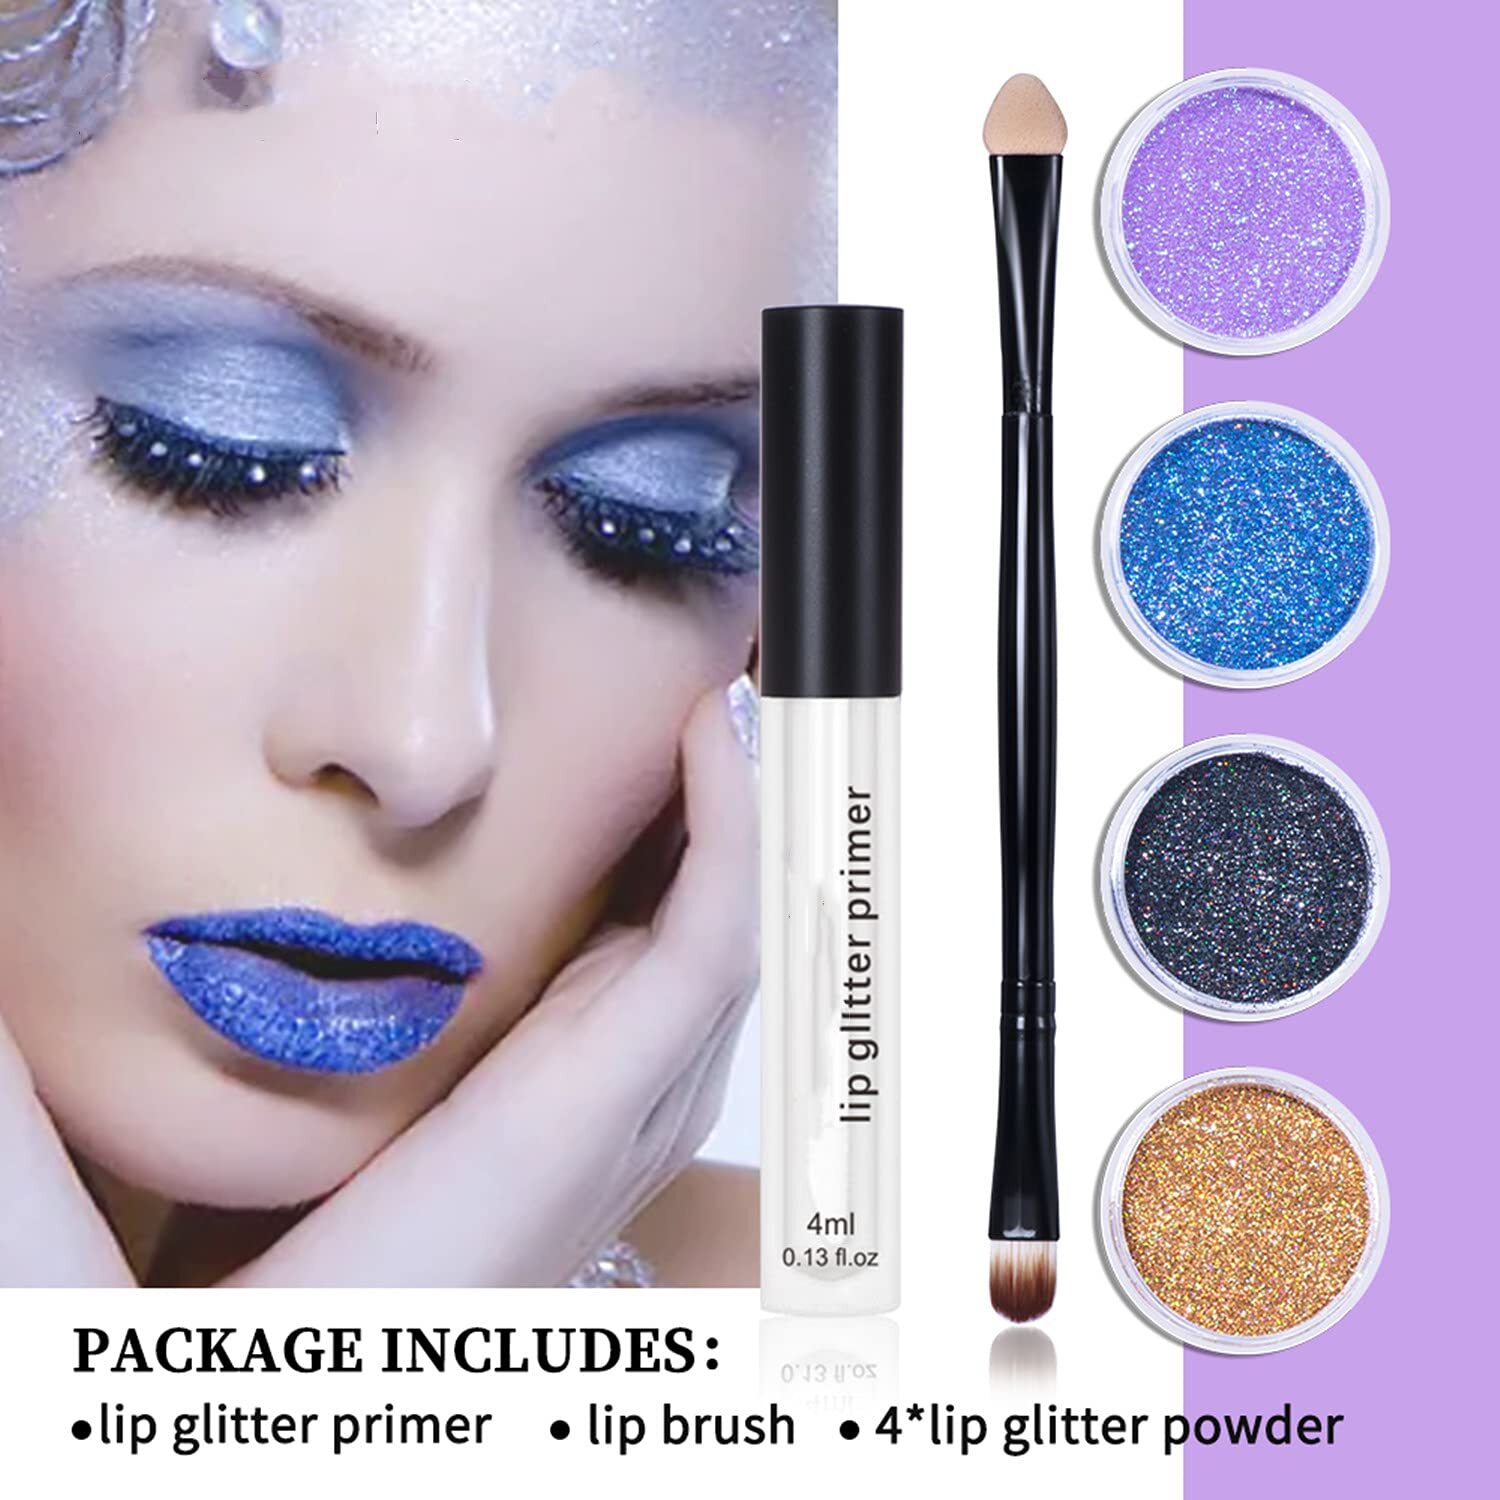 MAEPEOR Glitter Lips Smudgeproof and Longlasting Glitter Lip Kit